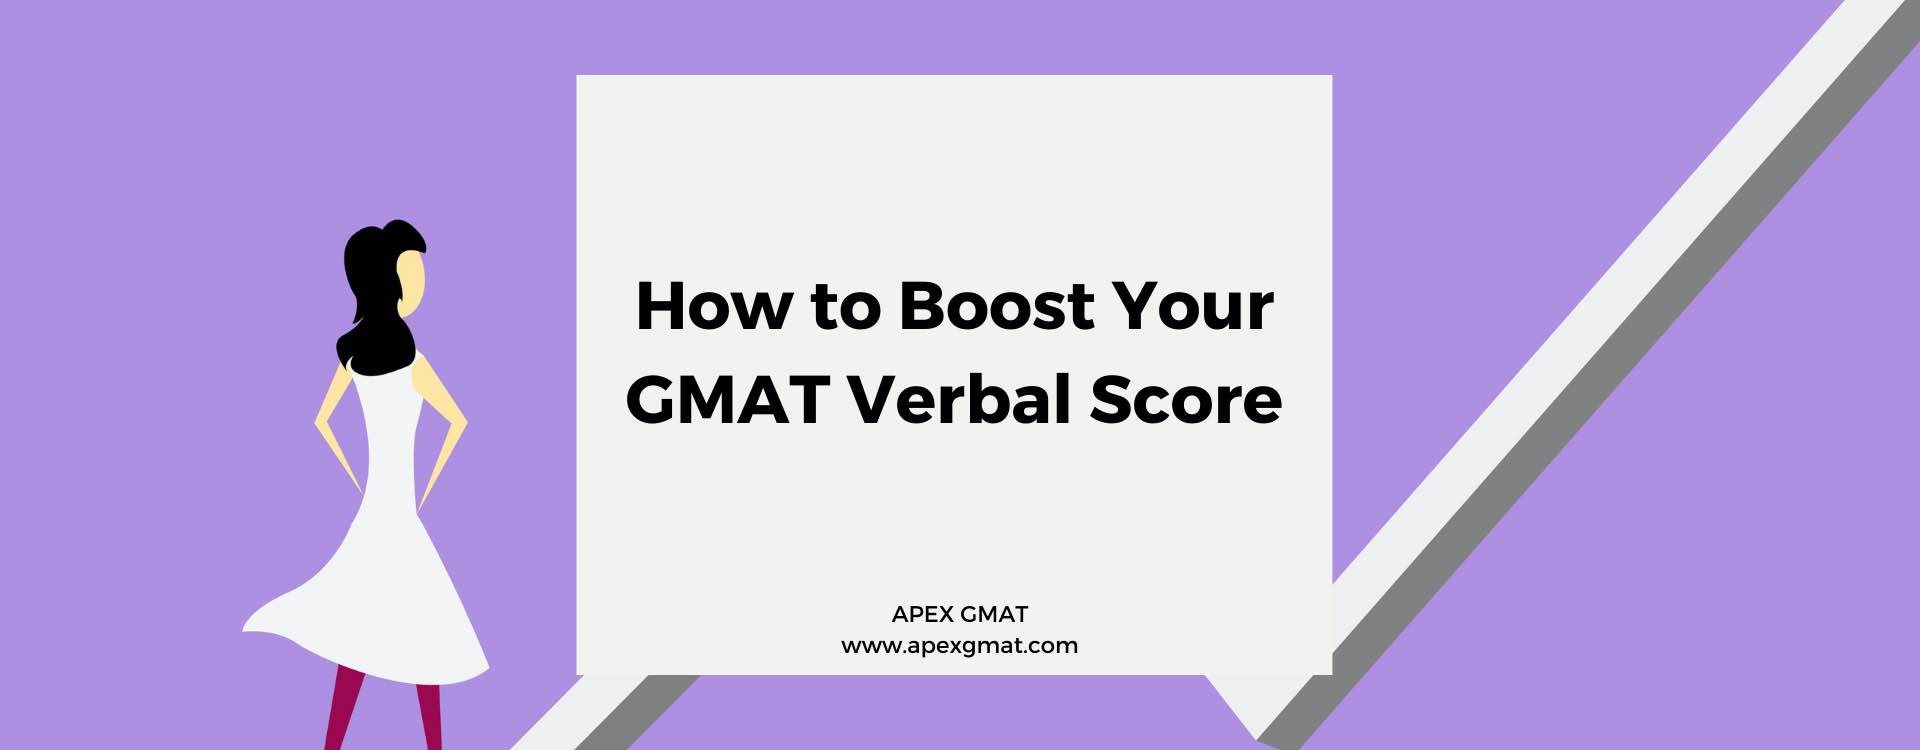 How to Boost Your GMAT Verbal Score